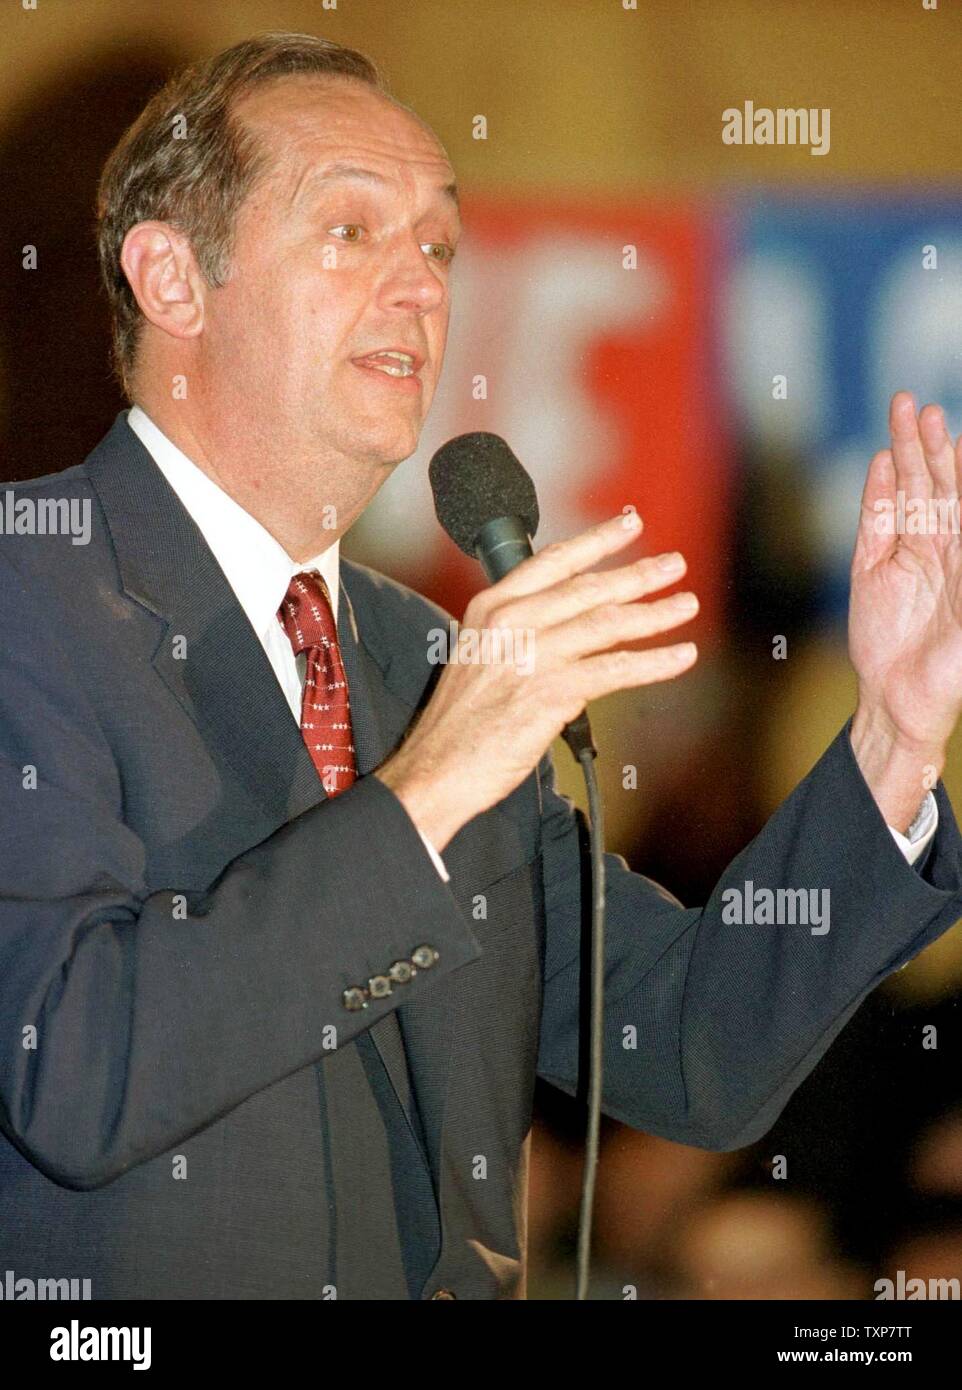 CLE2000020801 - 08 FEBRUARY 2000 - CLEVELAND HEIGHTS, OHIO, USA: Bill Bradley makes a point about his support for affirmative action during a campaign stop in Cleveland Heights, Ohio. About 500 people turned out for the town meeting, February 8.   jr/mw/Mike Williams      UPI Stock Photo